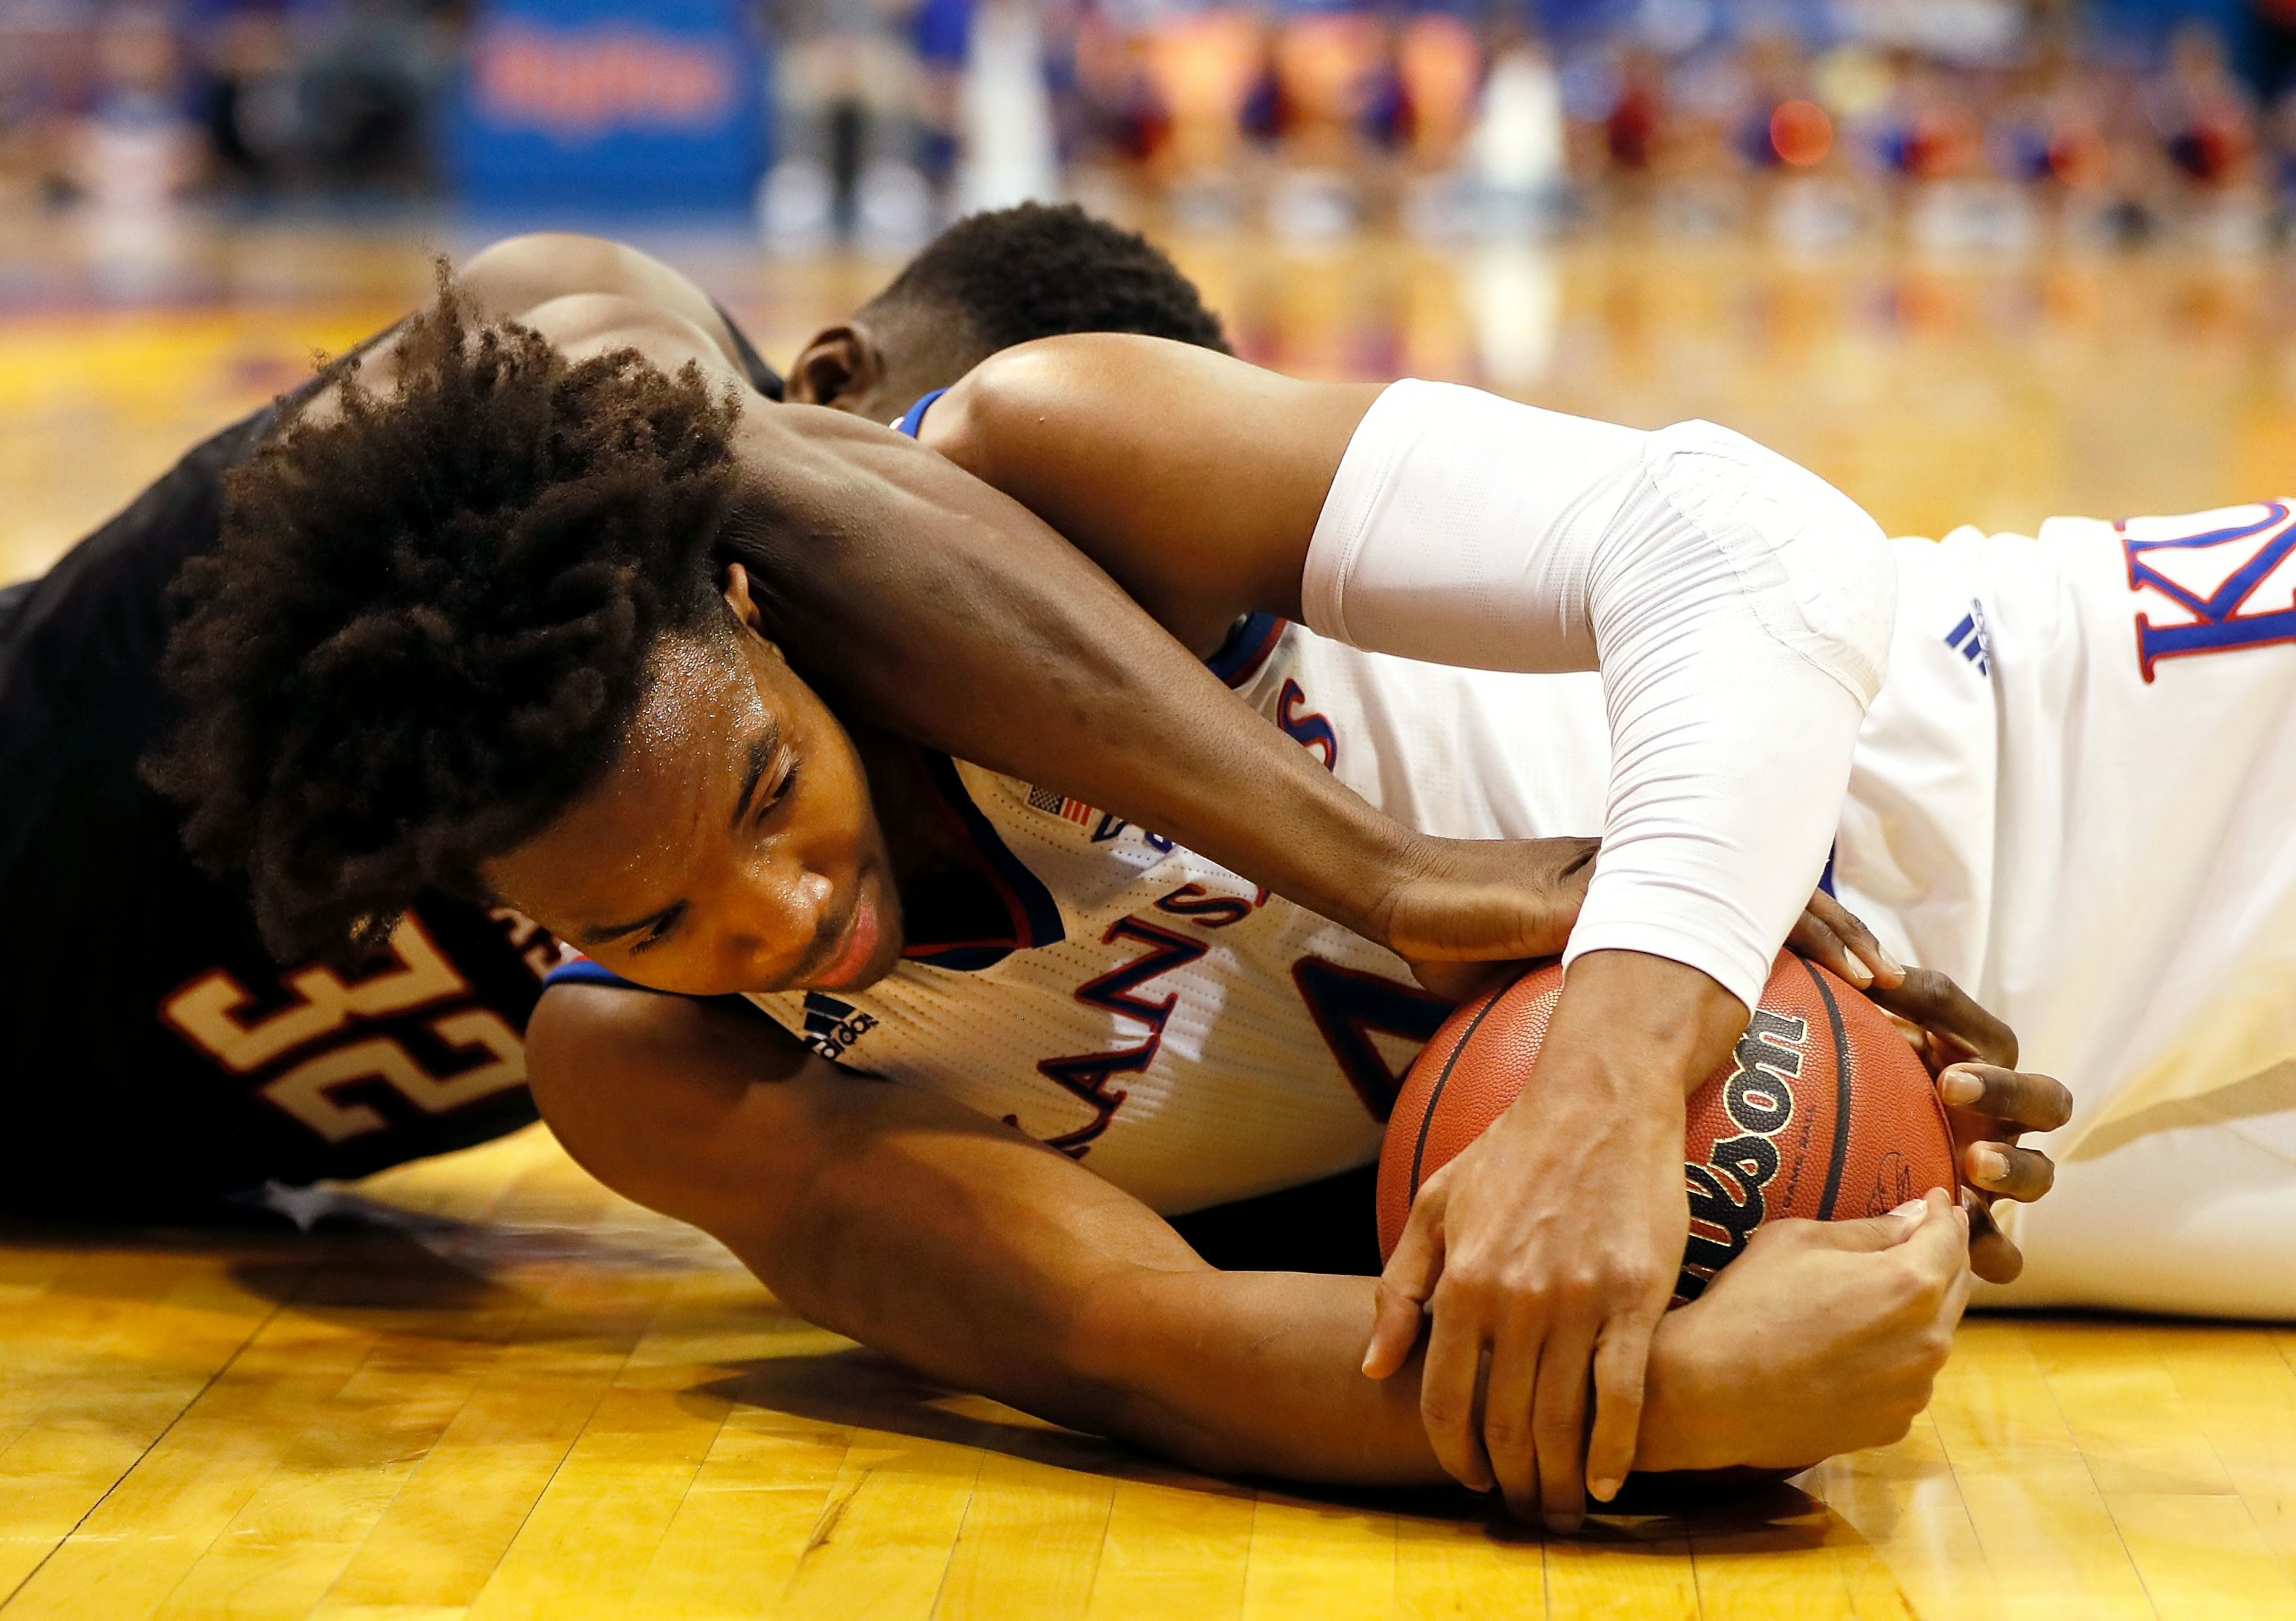 Texas Tech basketball wins vs. KU have been rare but exciting Page 6